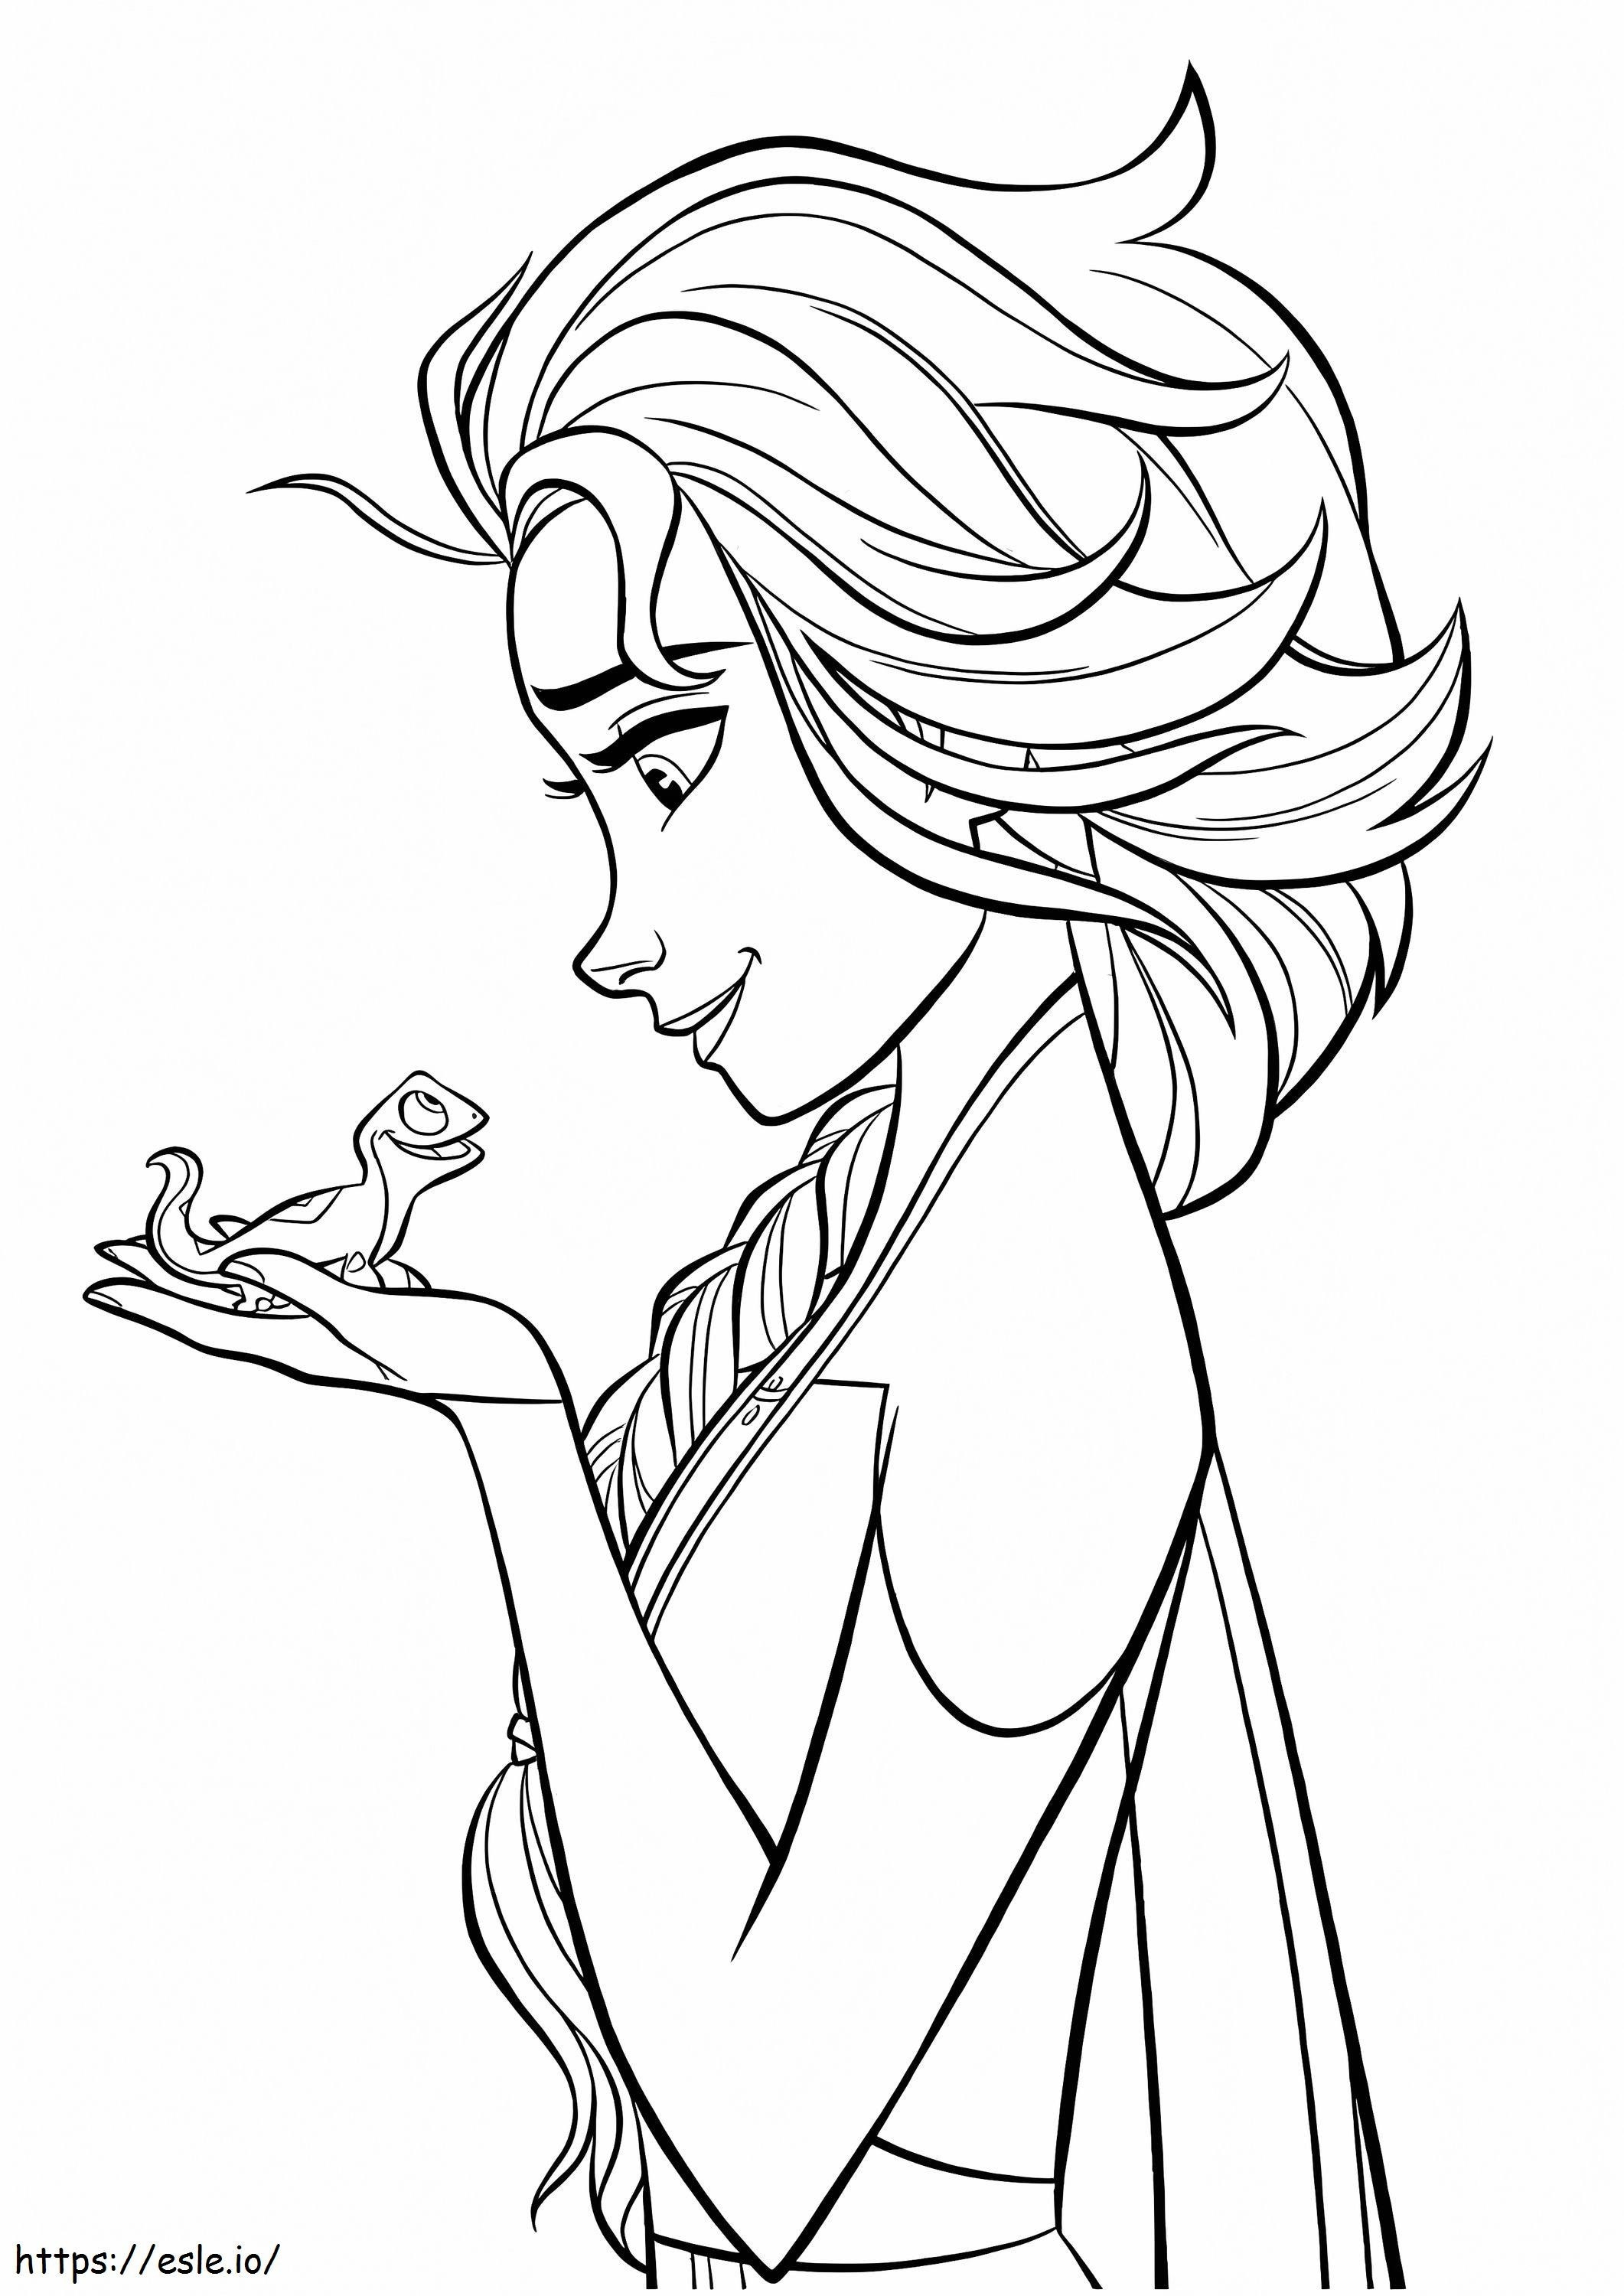 Elsa Holds Bruni coloring page